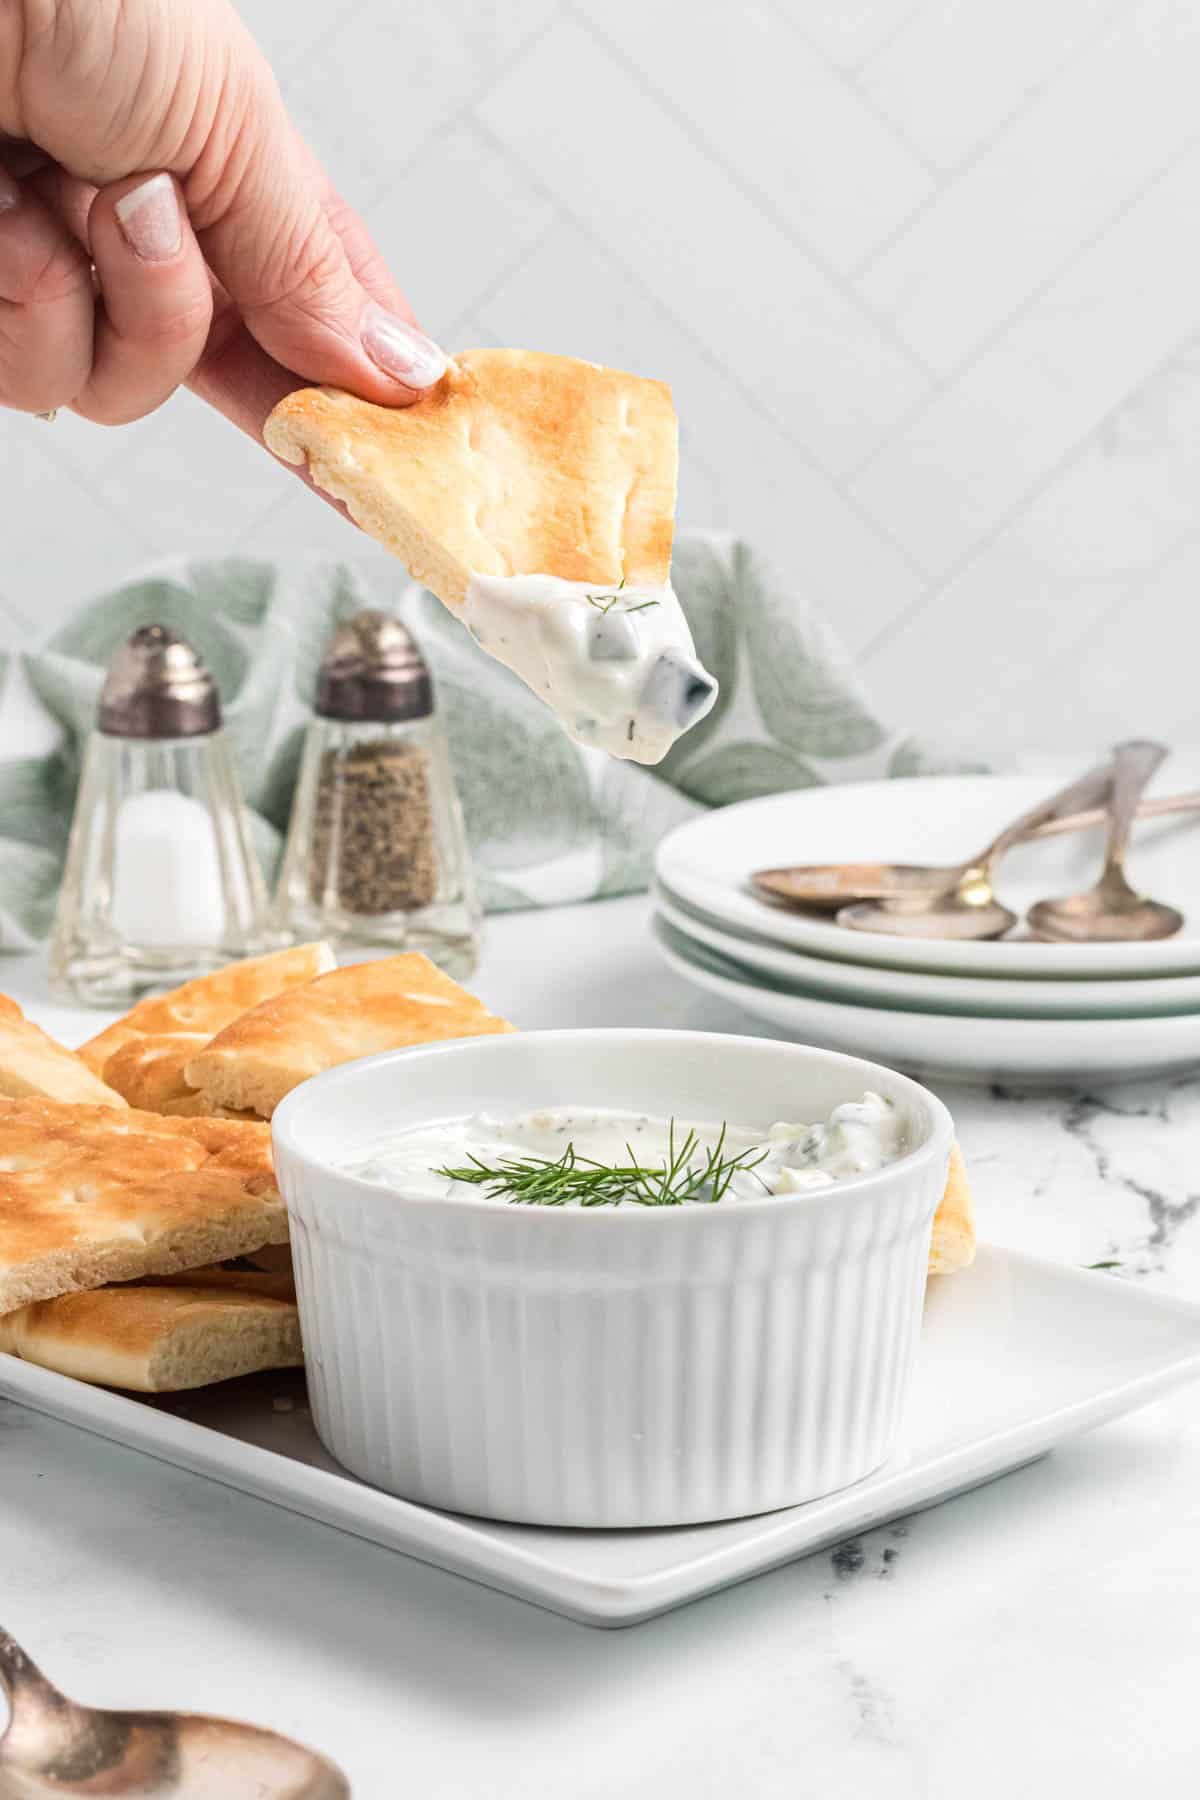 A hand holding a pita bread triangle to dip into tzatziki sauce.